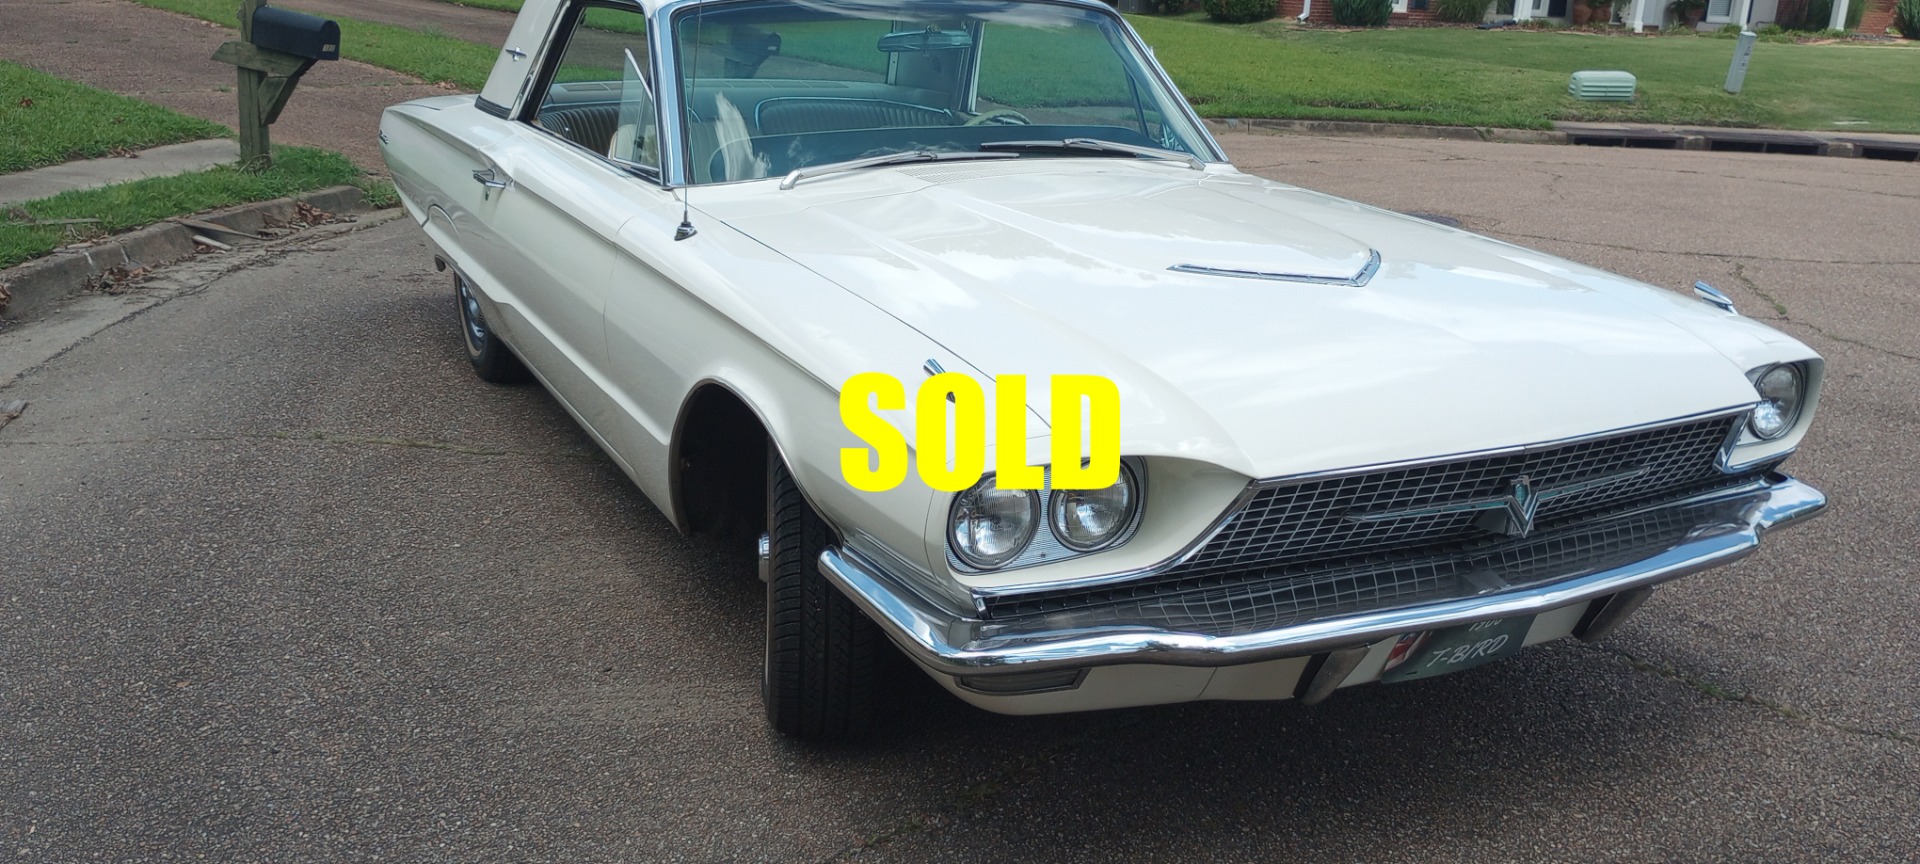 Used 1966 Ford Thunderbird  251 , For Sale $19500, Call Us: (704) 996-3735